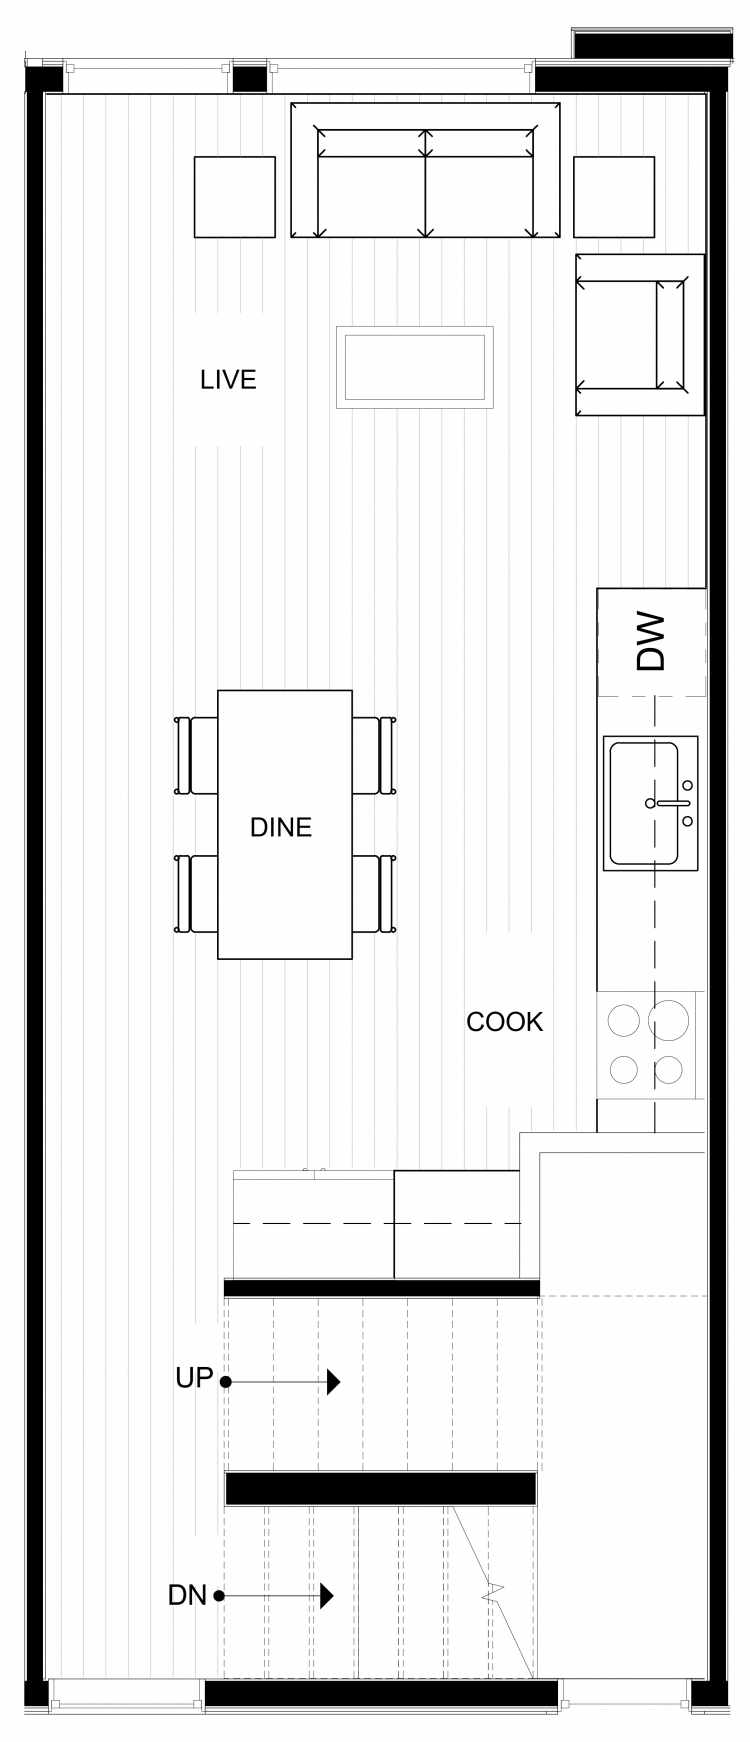 Third Floor Plan of 1541 Grandview Pl E, One of the Larrabee Townhomes in Capitol Hill